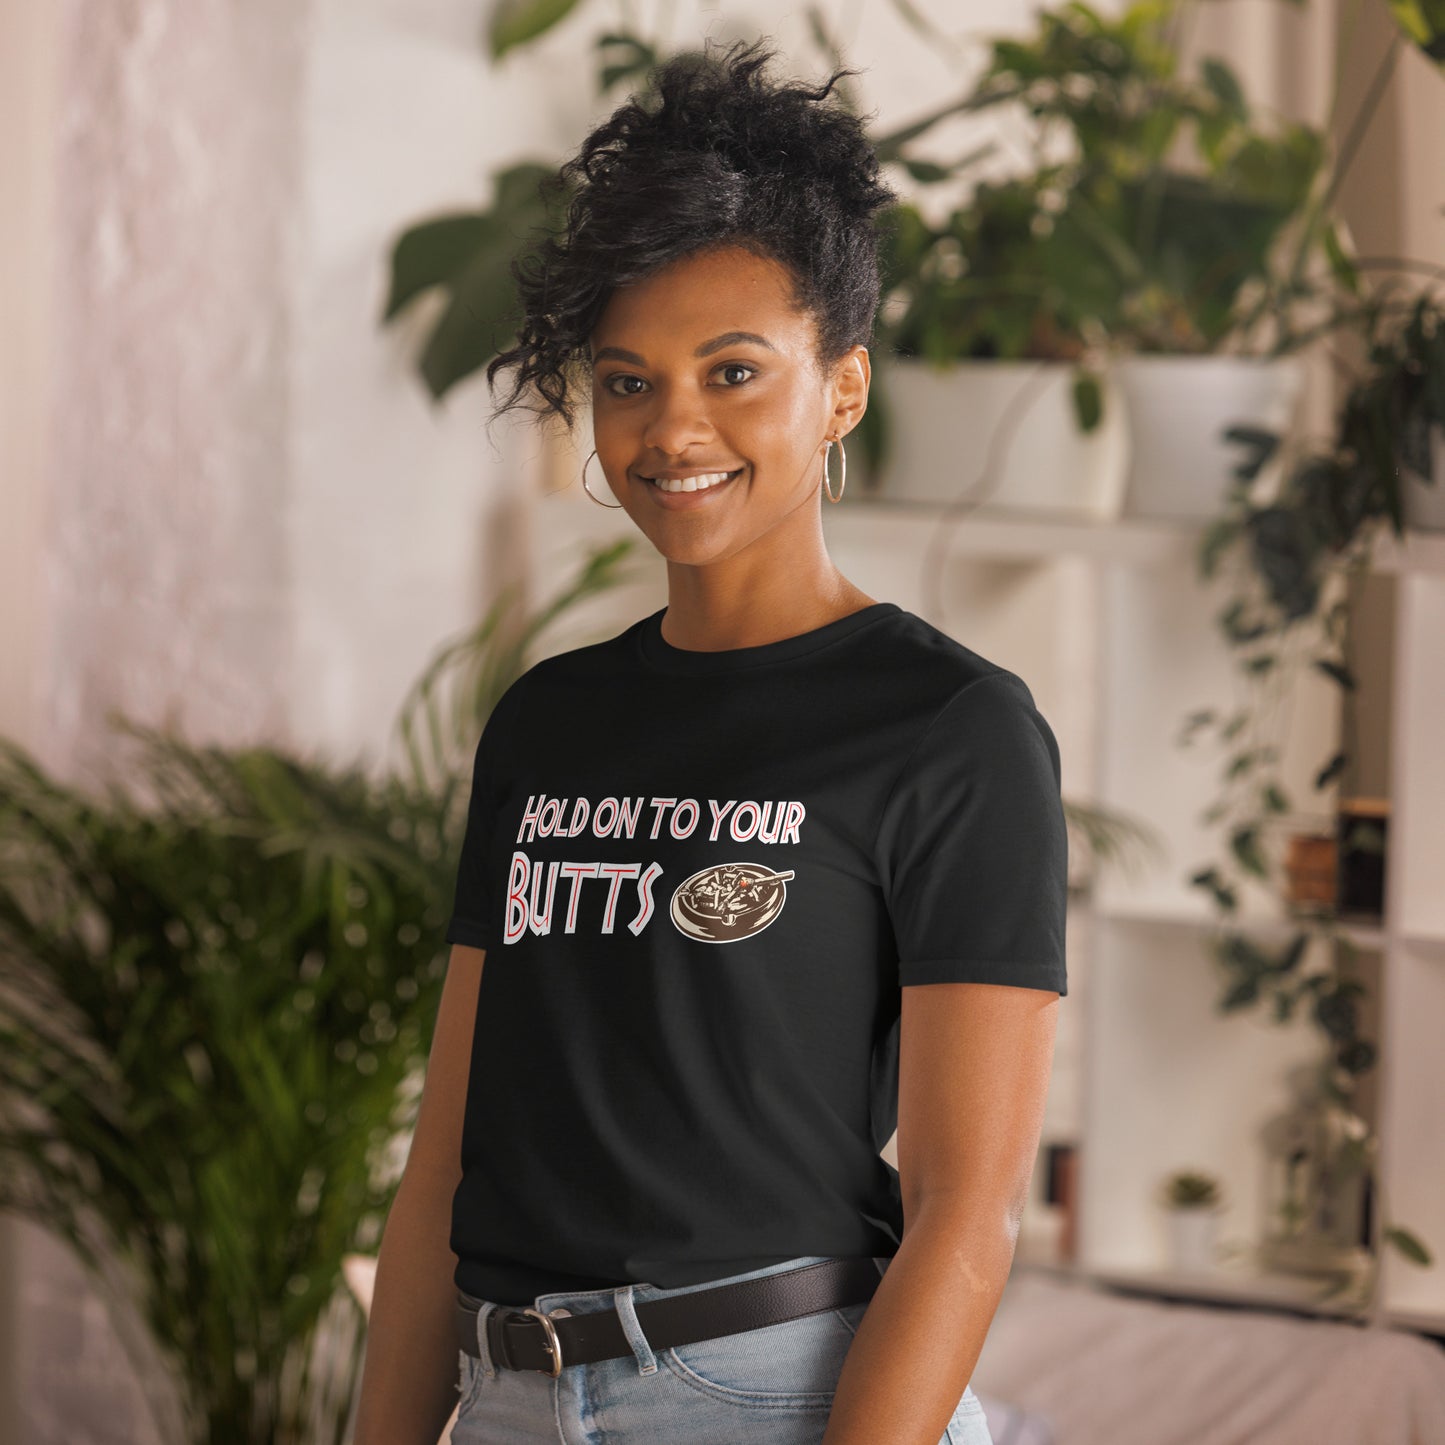 Hold on to your butts short-sleeve unisex t-shirt black mockup